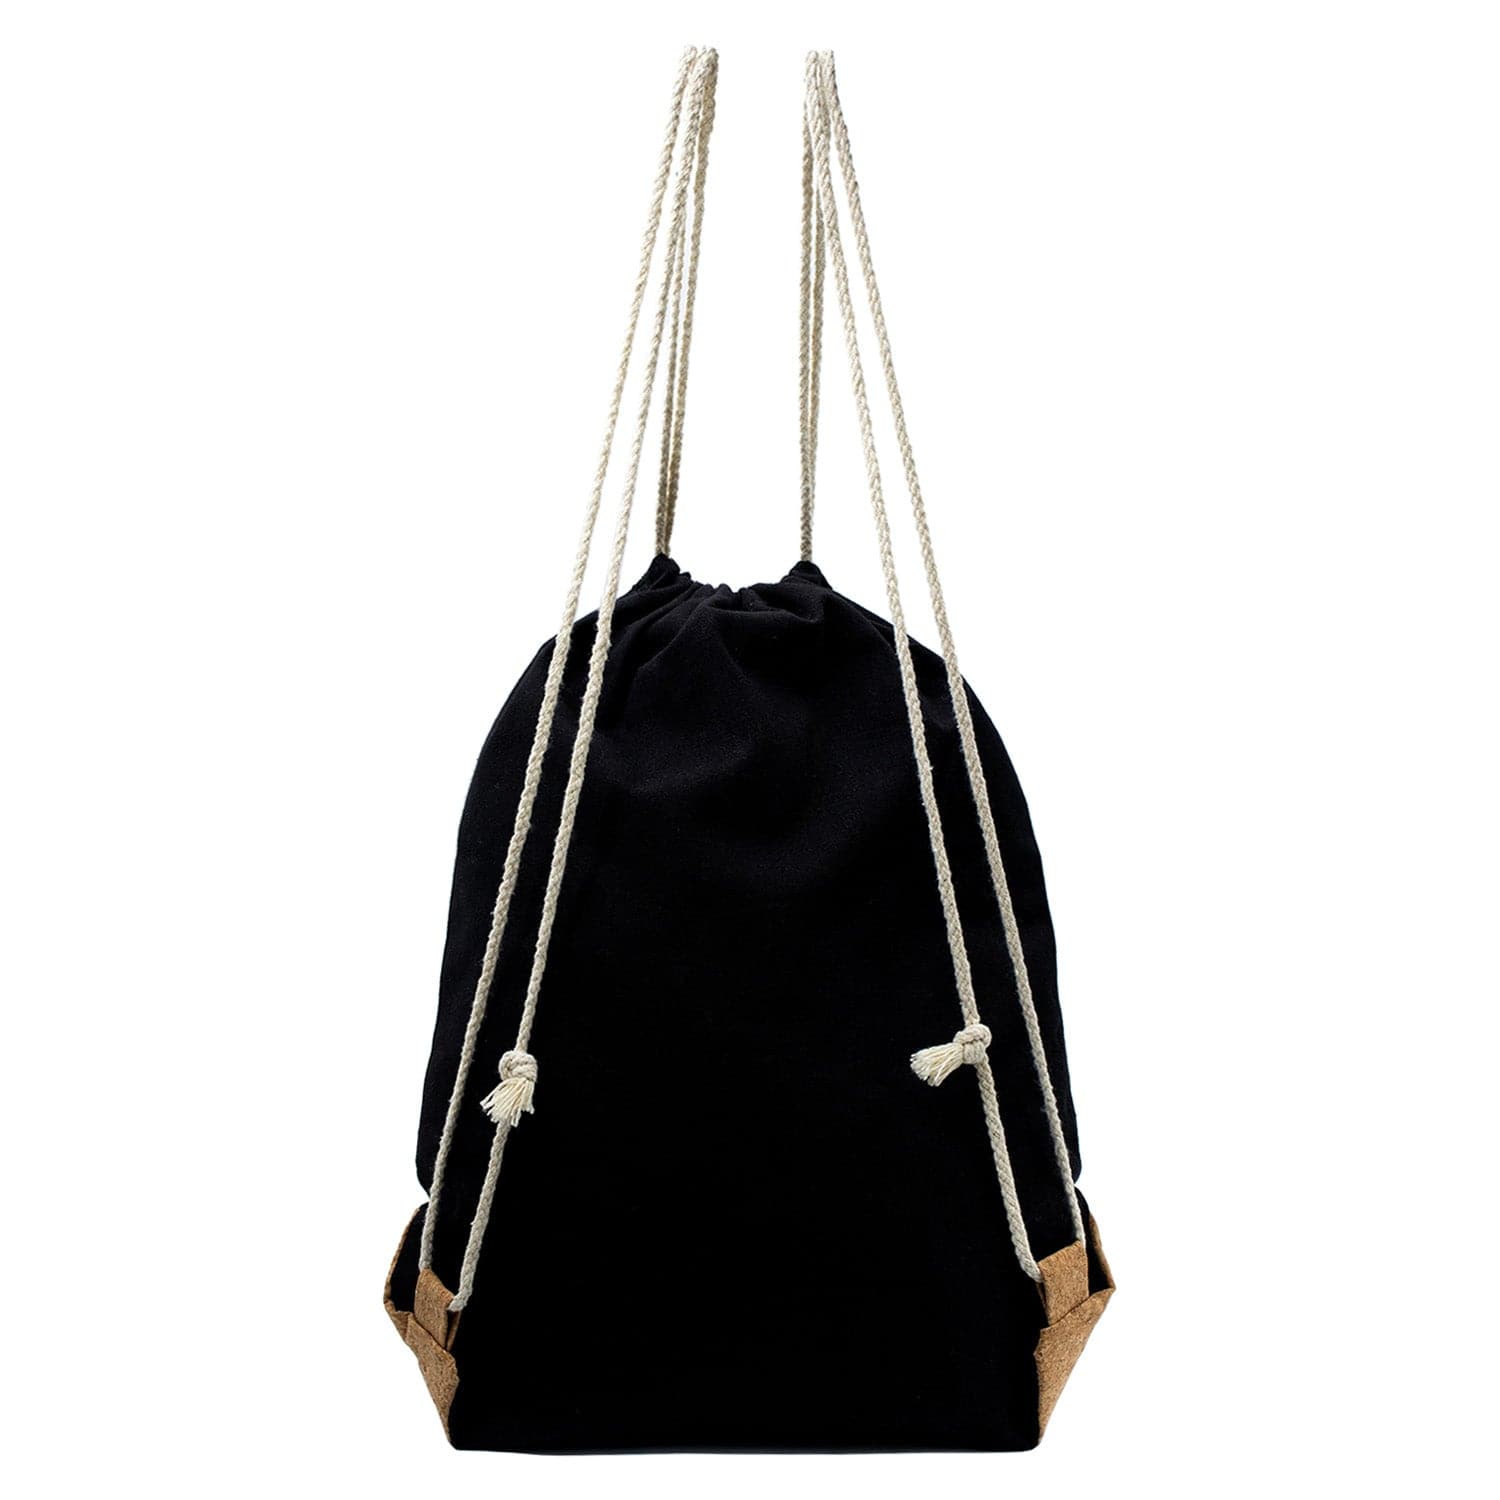 16" Drawstring Wholesale Backpack in Black with Cork - Bulk Case of 100